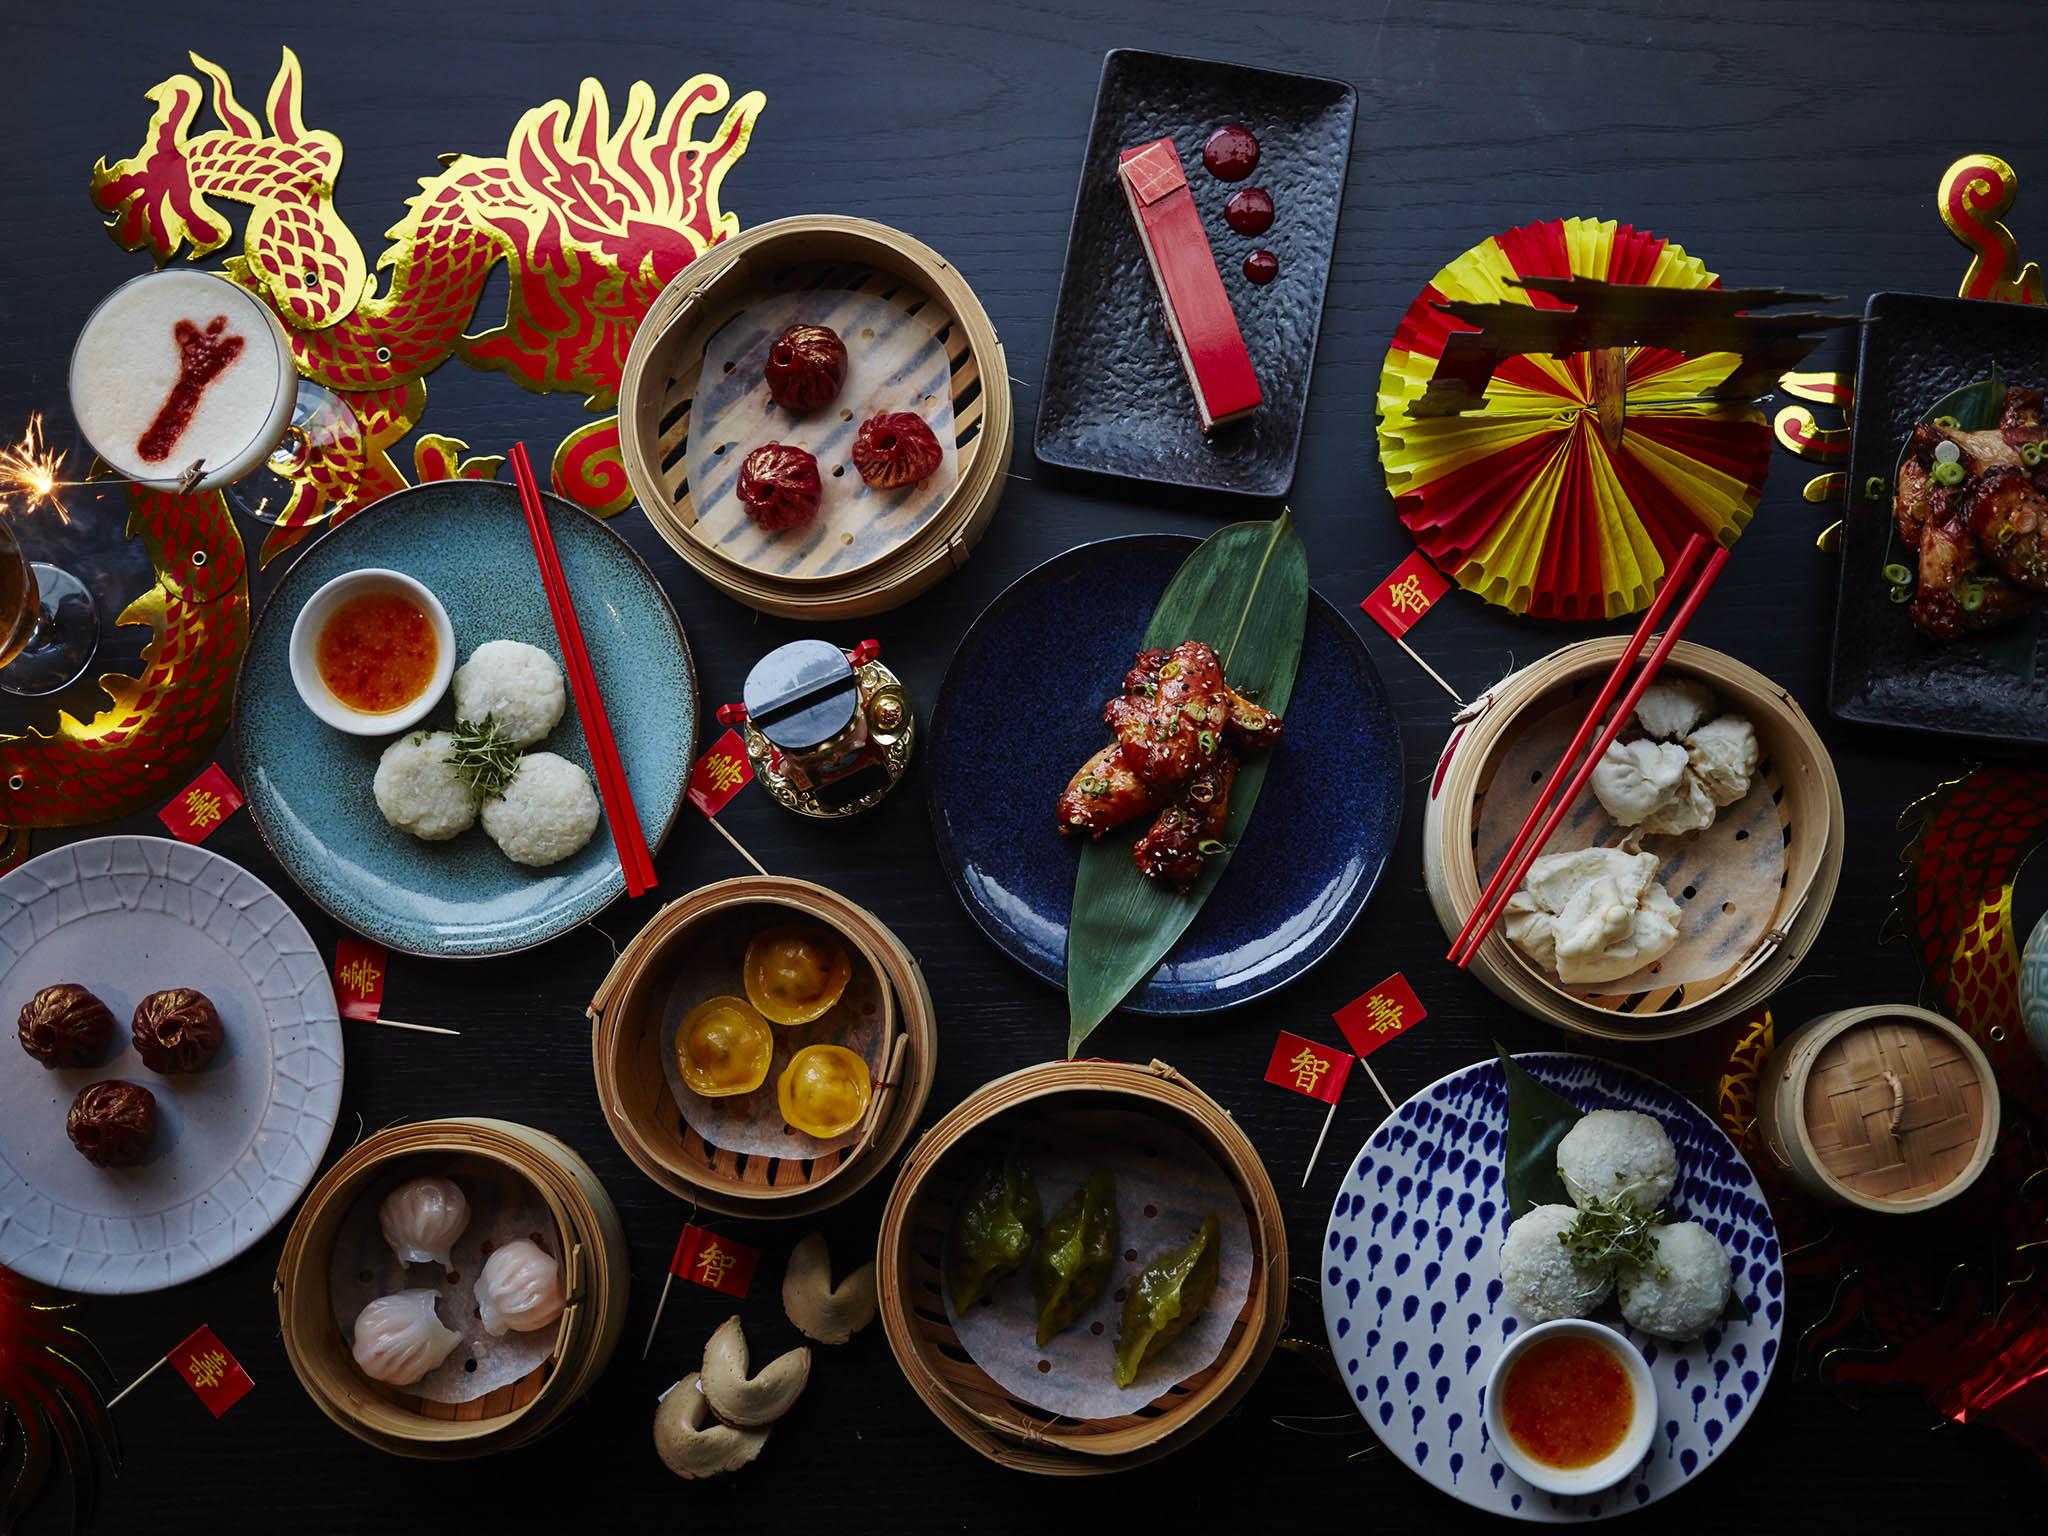 Ring in 2017 with a delicious dim sum meal at Ping Pong in Covent Garden